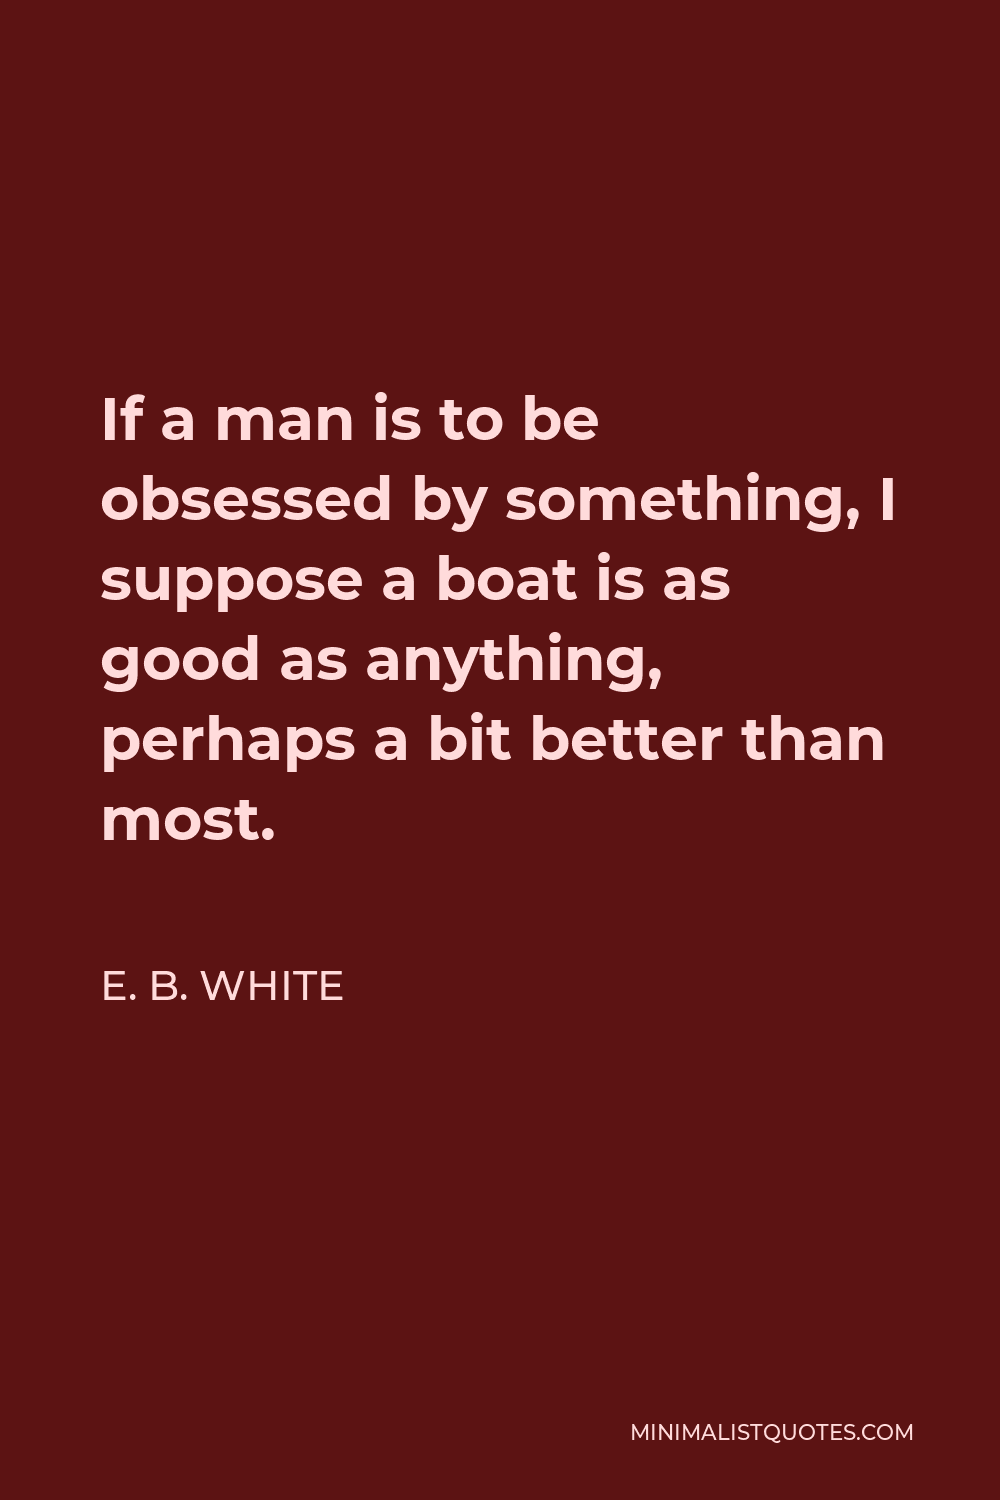 E. B. White Quote - If a man is to be obsessed by something, I suppose a boat is as good as anything, perhaps a bit better than most.